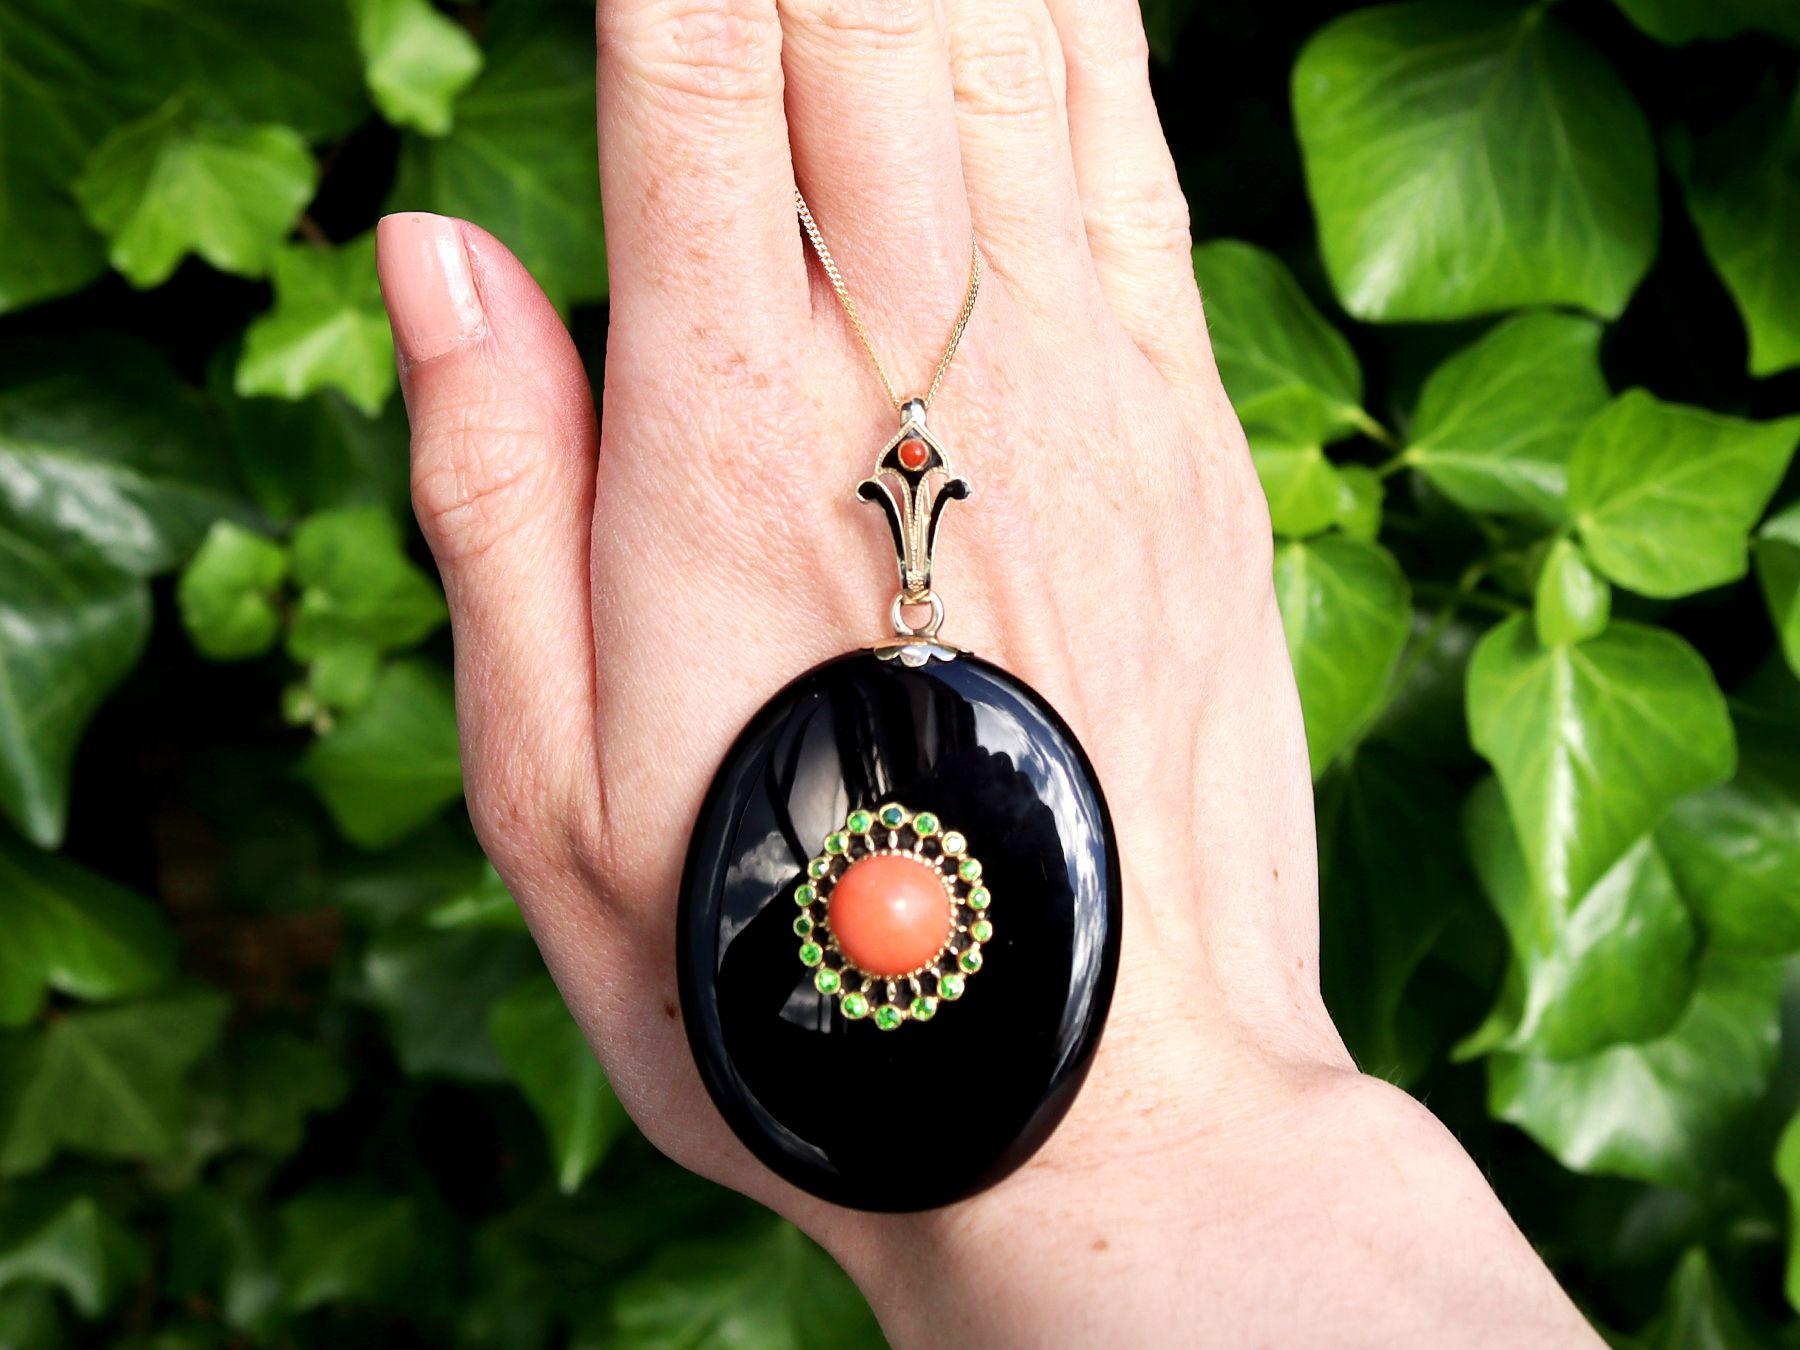 A stunning, fine and impressive antique black onyx, 3.50 carat coral and 0.36 carat demantoid garnet, 12ct karat yellow gold pendant; part of our diverse Victorian gemstone jewellery and estate jewelry collections.

This stunning, fine and